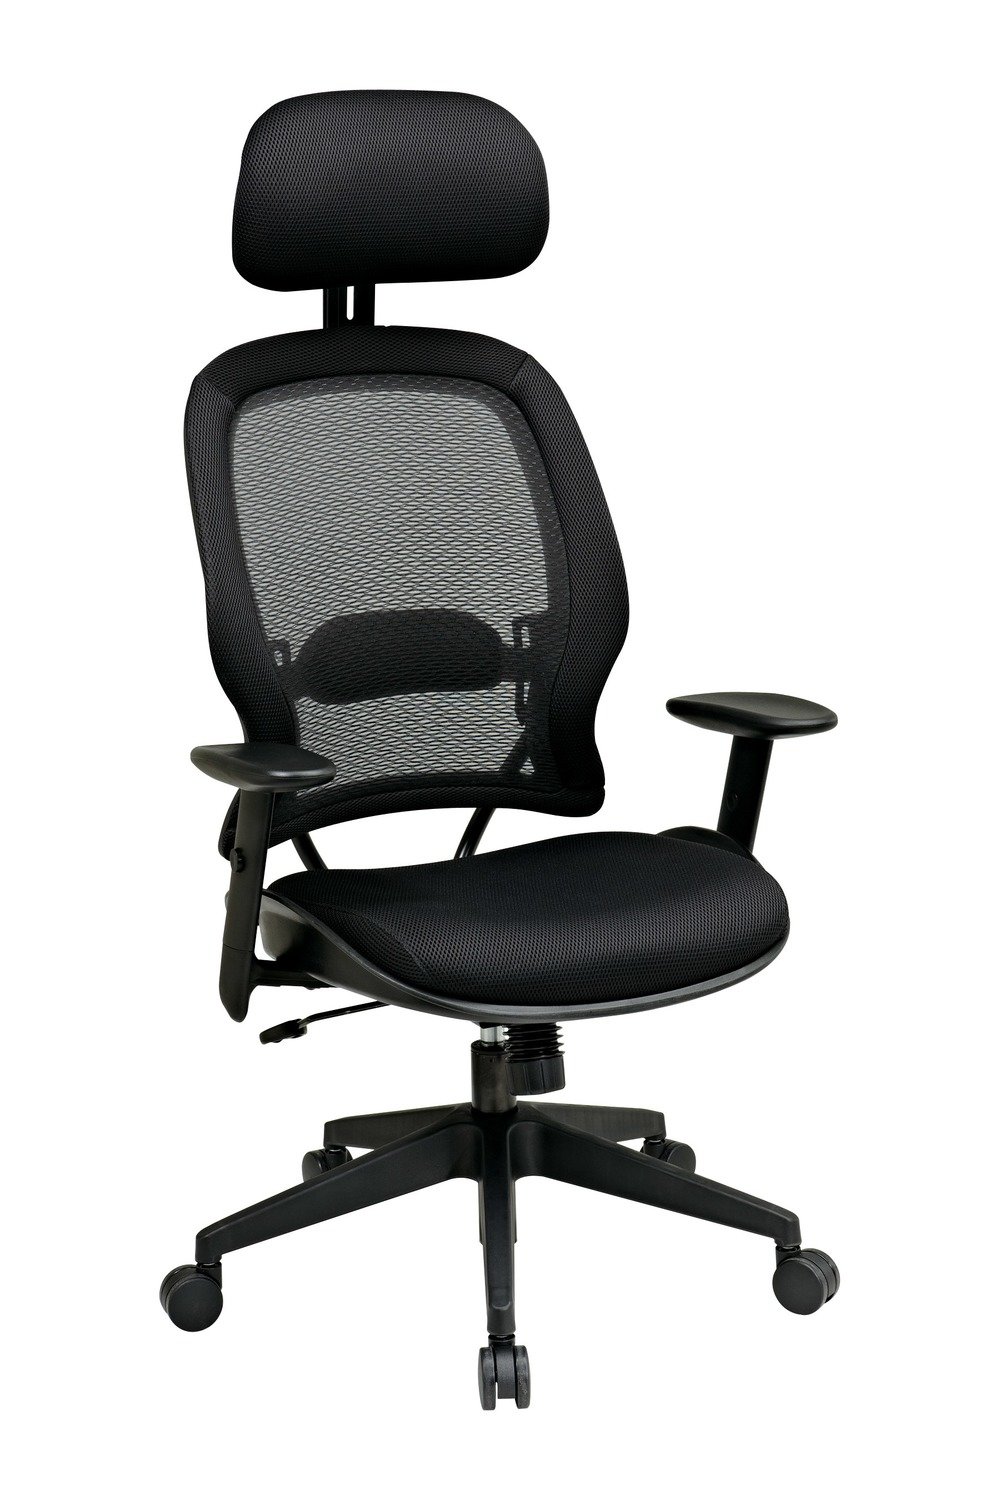 PROFESSIONAL AIRGRID BACK AND MESH SEAT CHAIR WITH ADJUSTABLE HEADREST